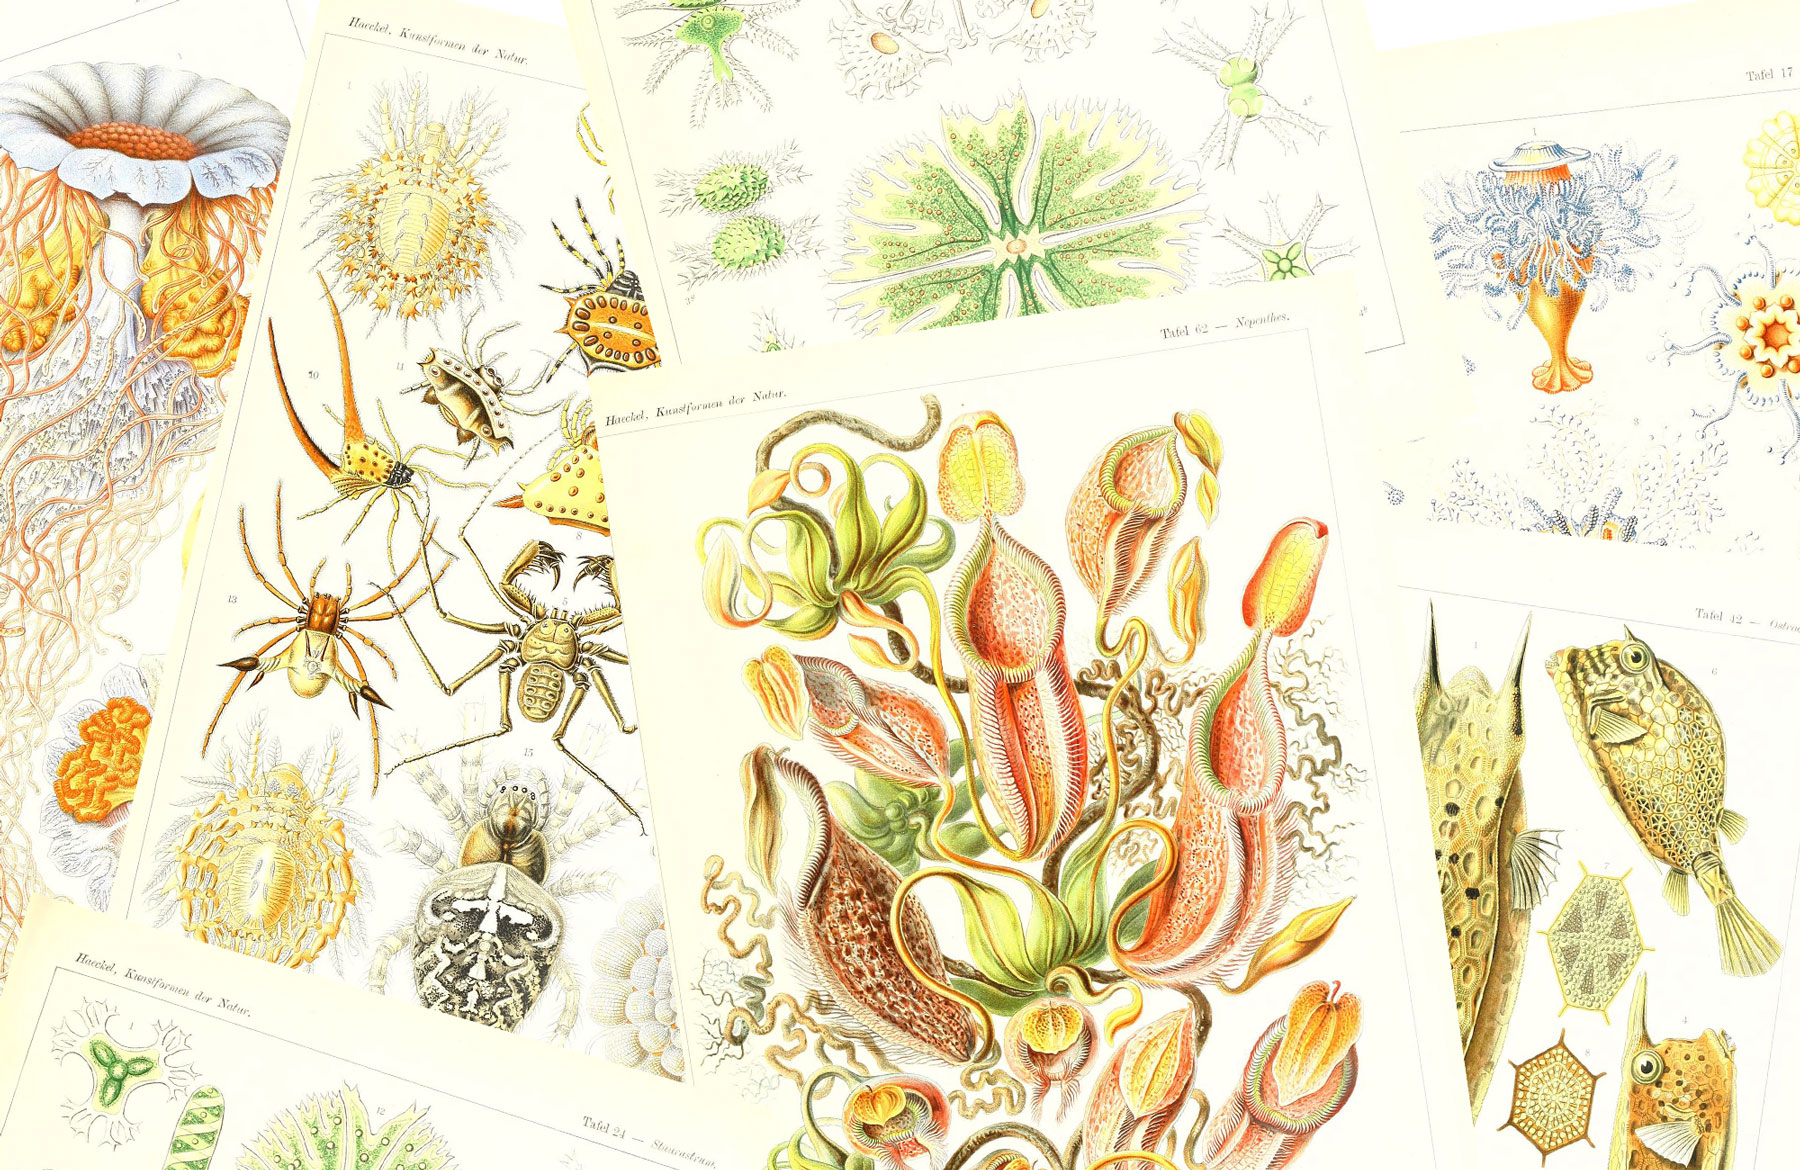 What Kunstformen der Nature by Ernst Haeckel meant for the history of science?